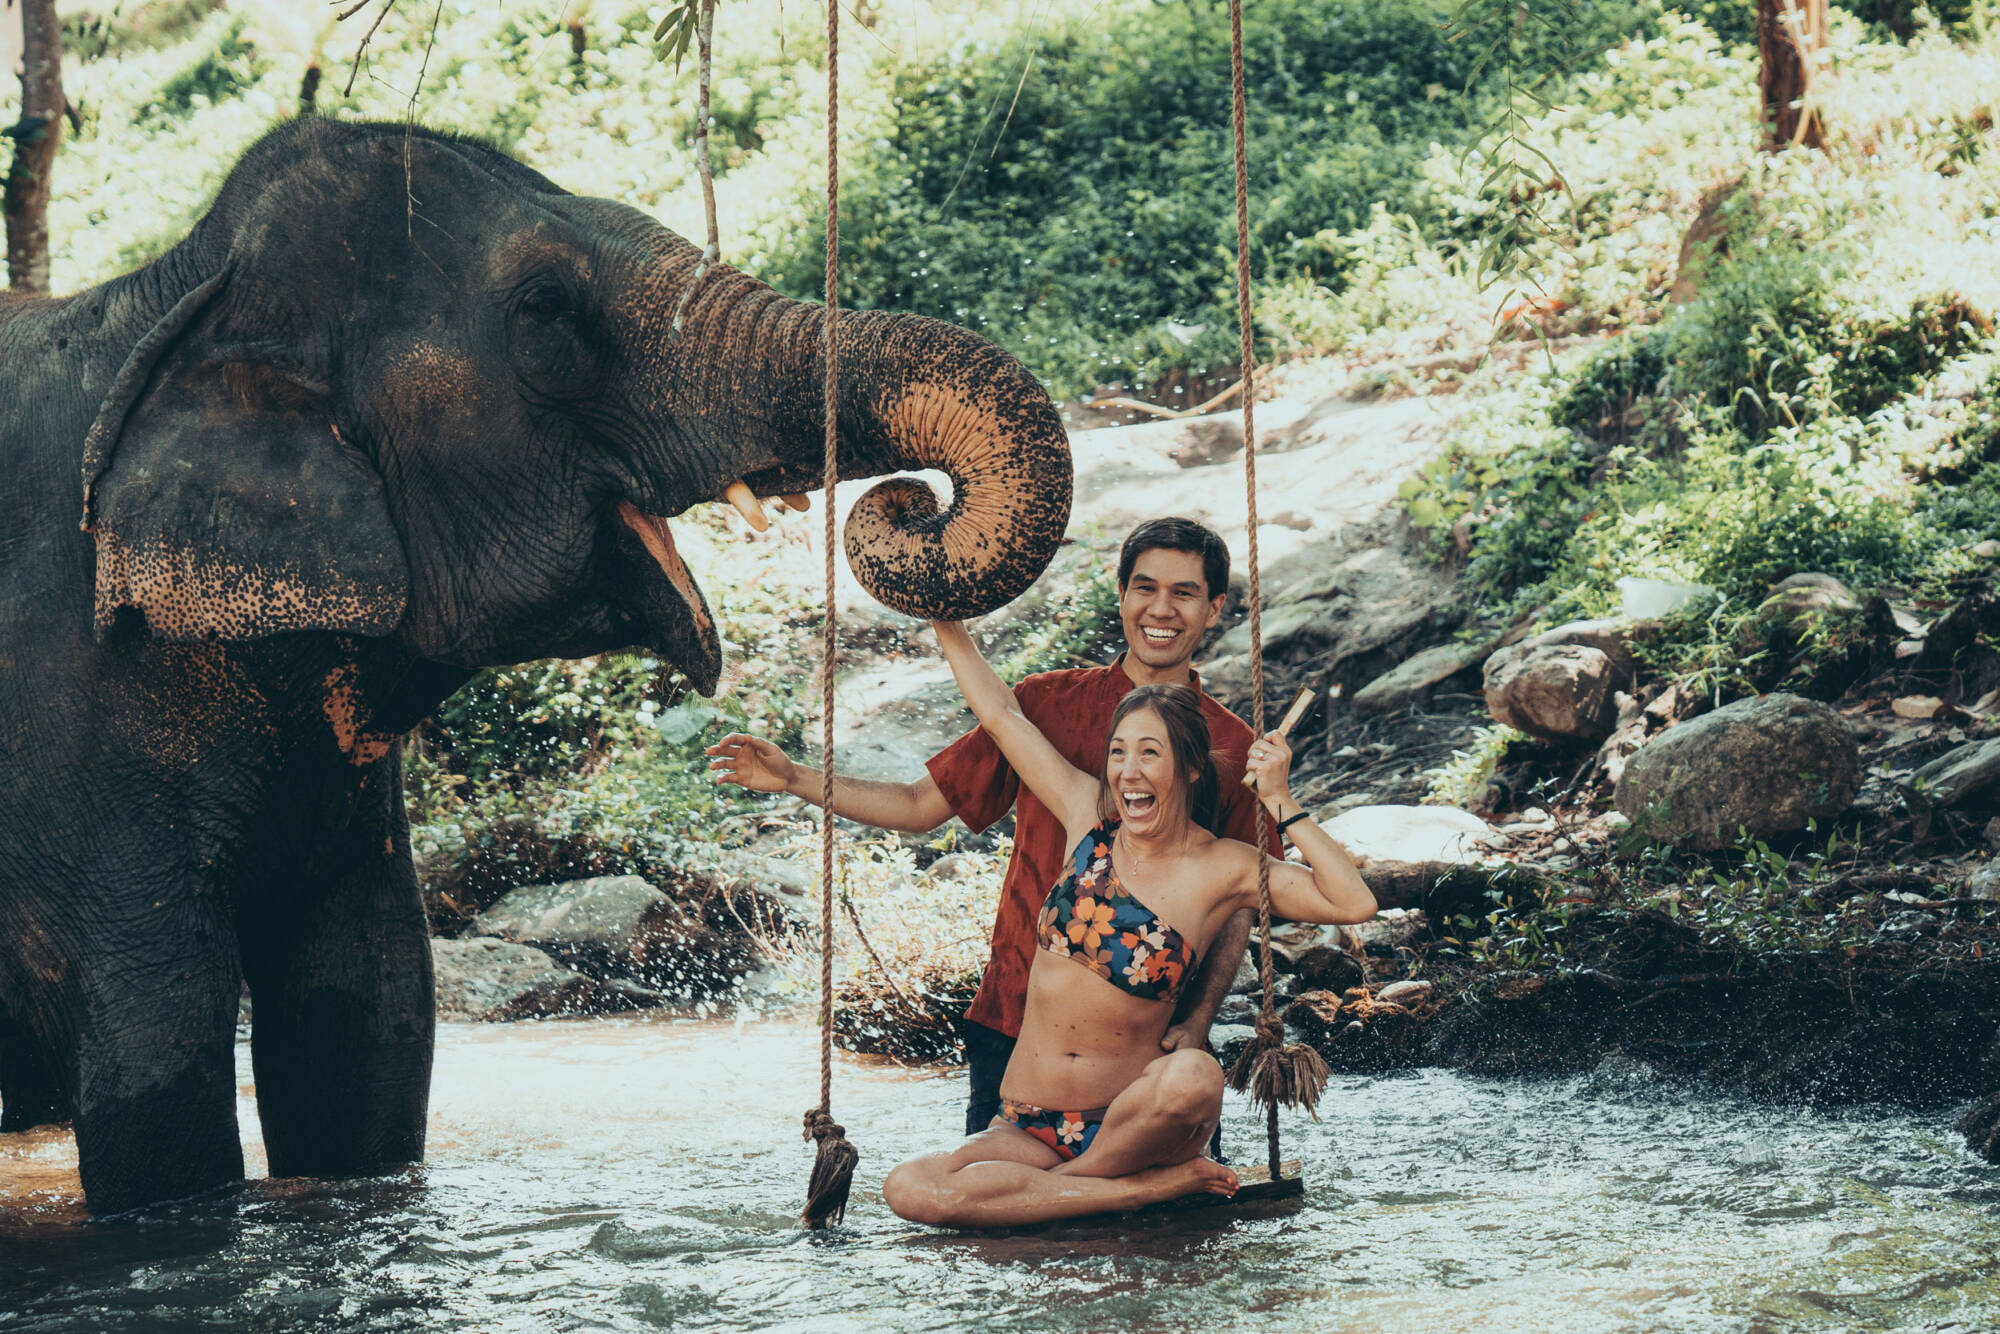 On a swing in the river with an elephant - Chiang Mai